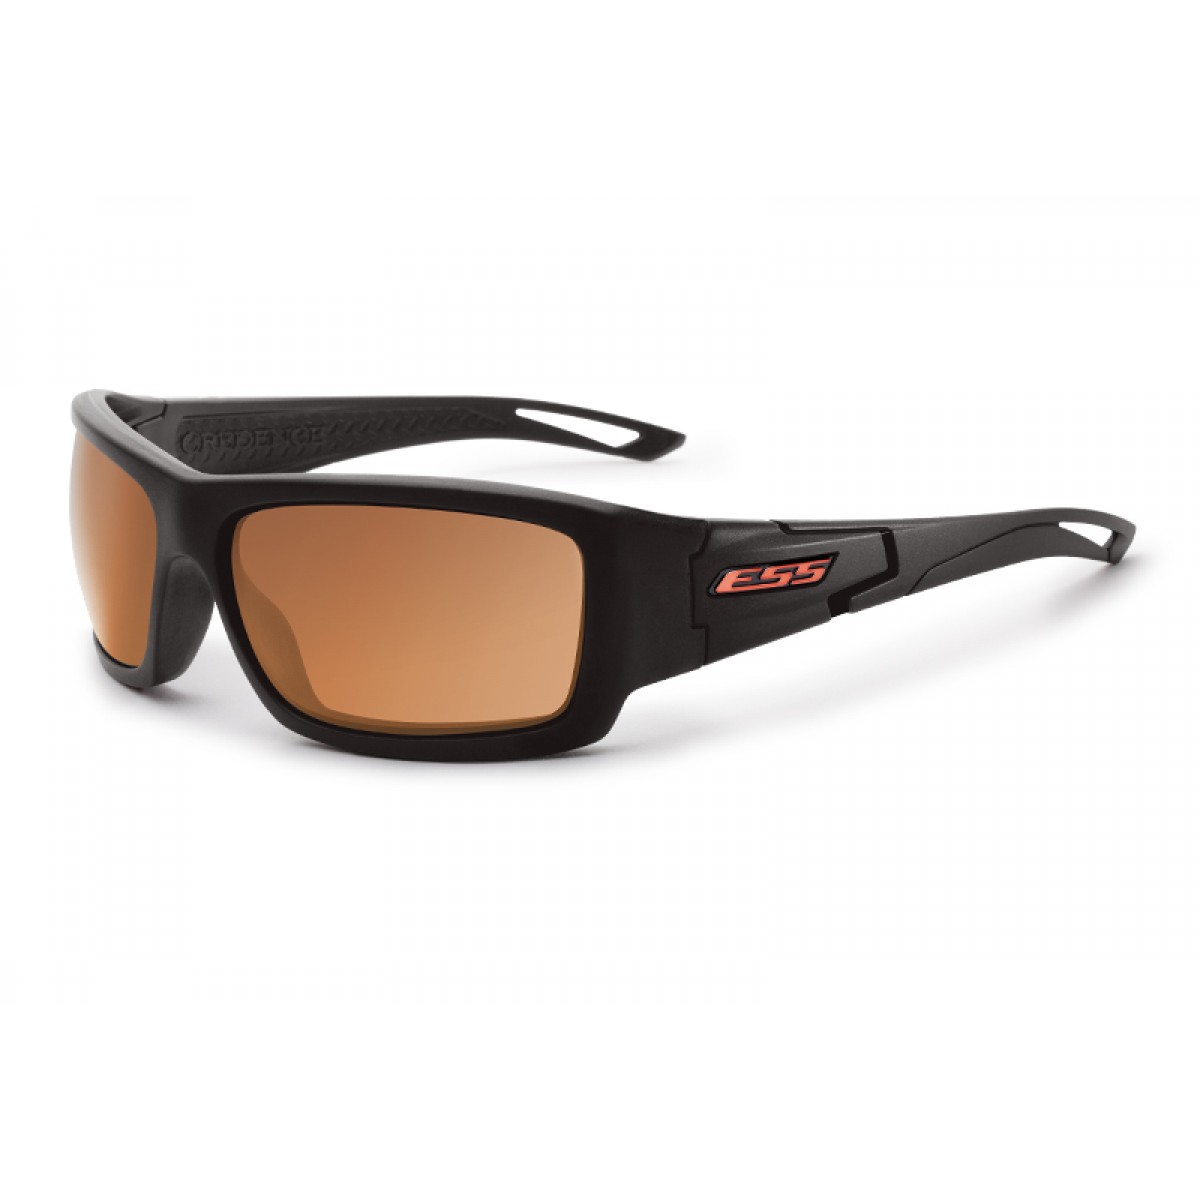 ess_credence_sunglasses_black_frame_with_mirrored_copper_lenses_ee9015-06_1